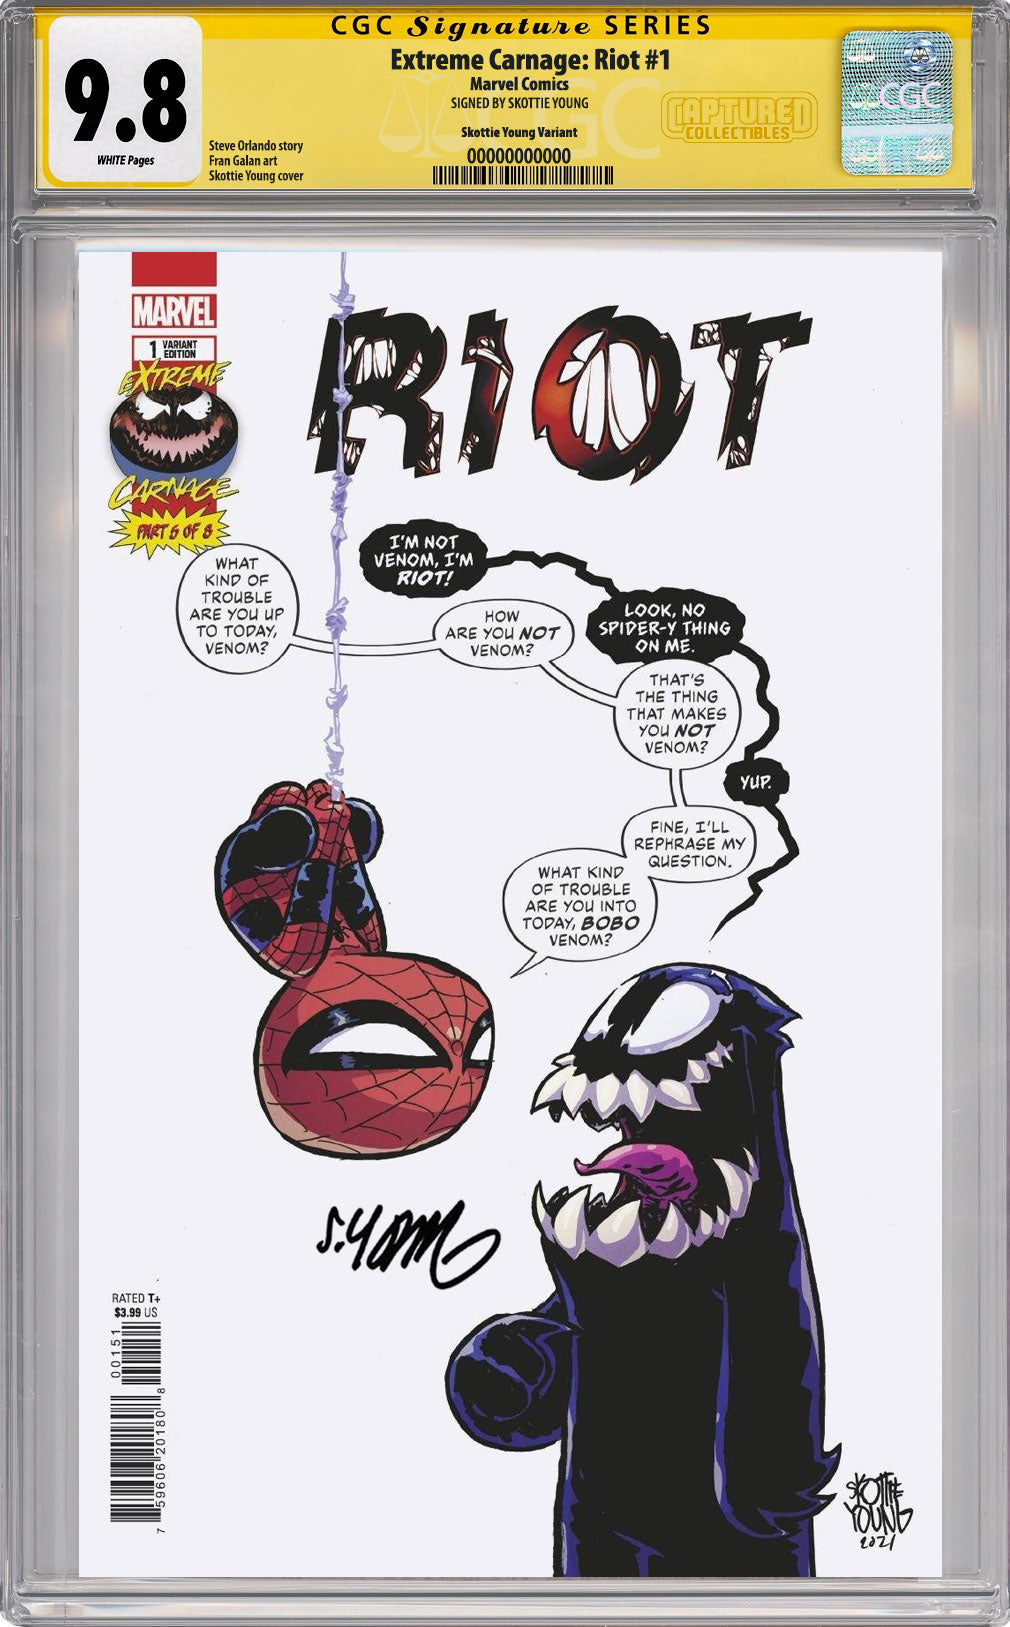 Extreme Carnage: Riot #1 Variant CGC SS 9.8 Signed by Skottie Young